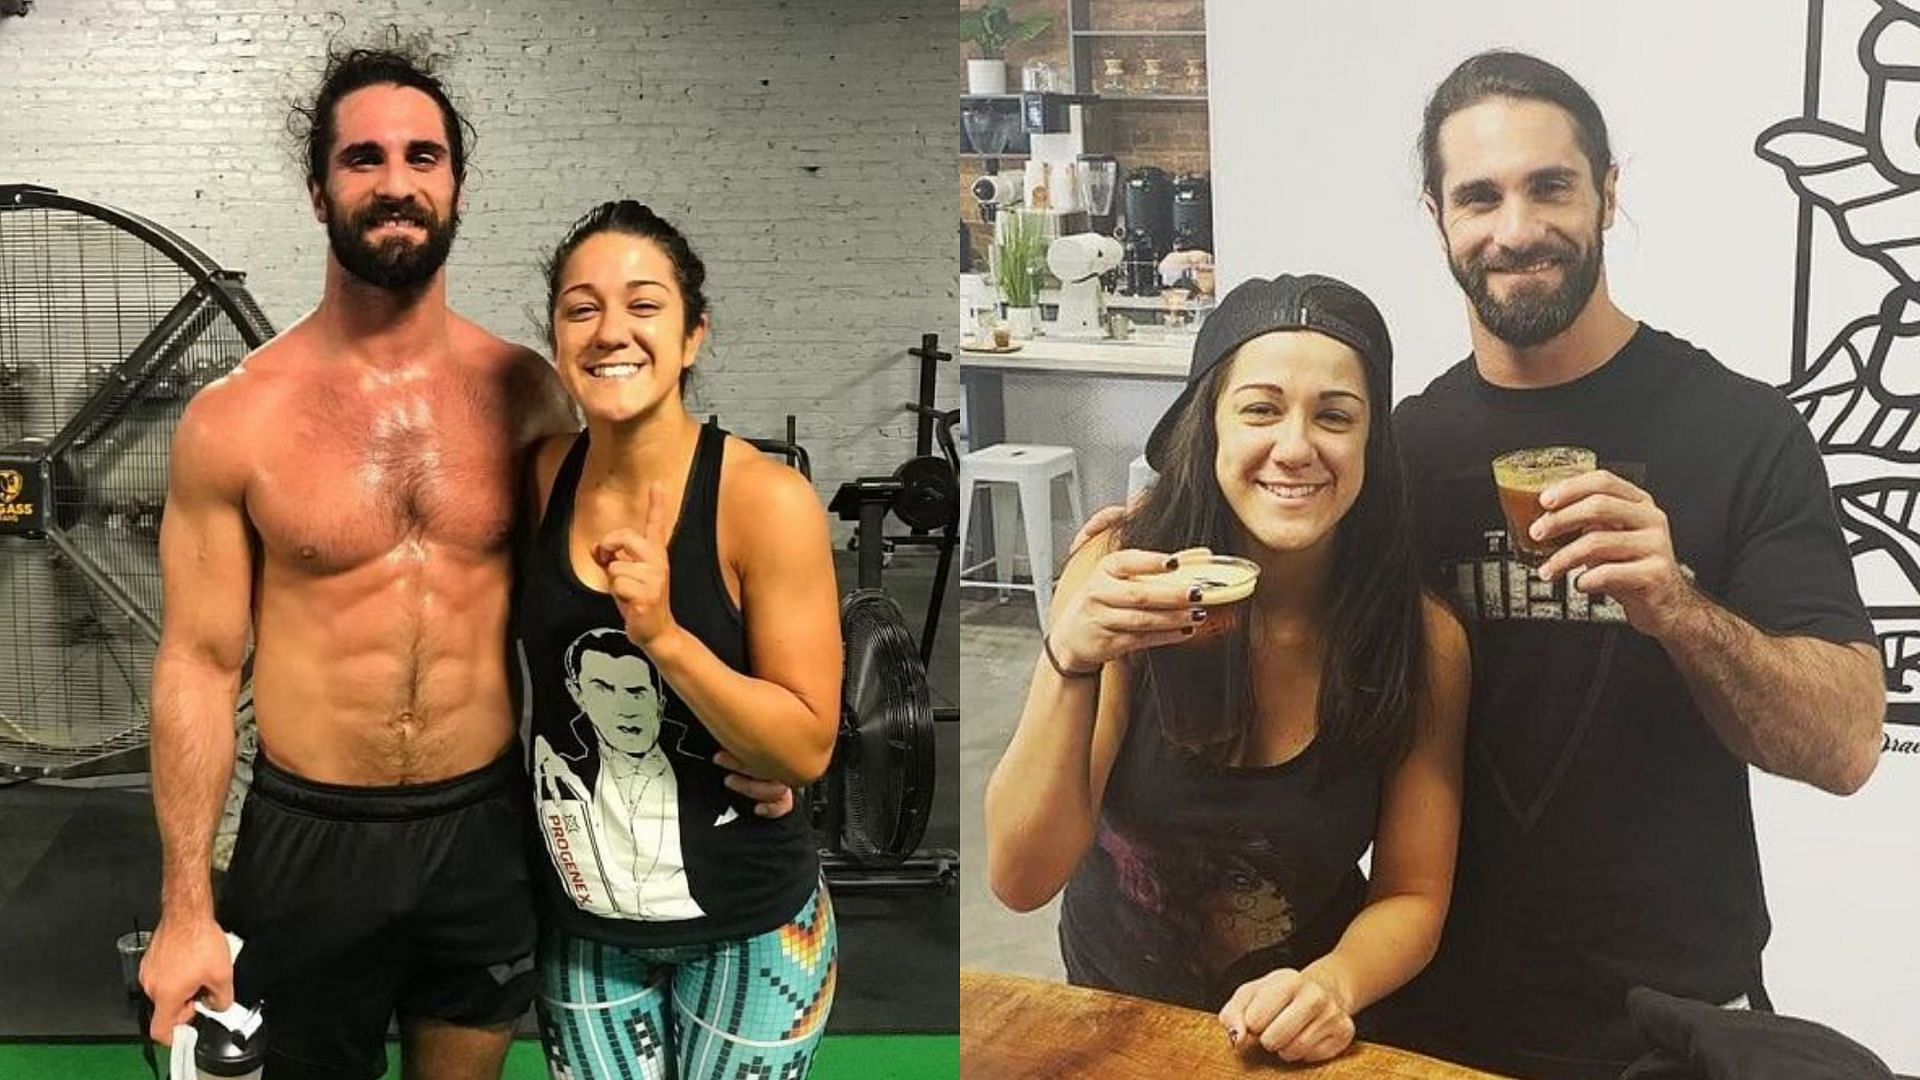 Bayley and Seth Rollins have a close bond in real life